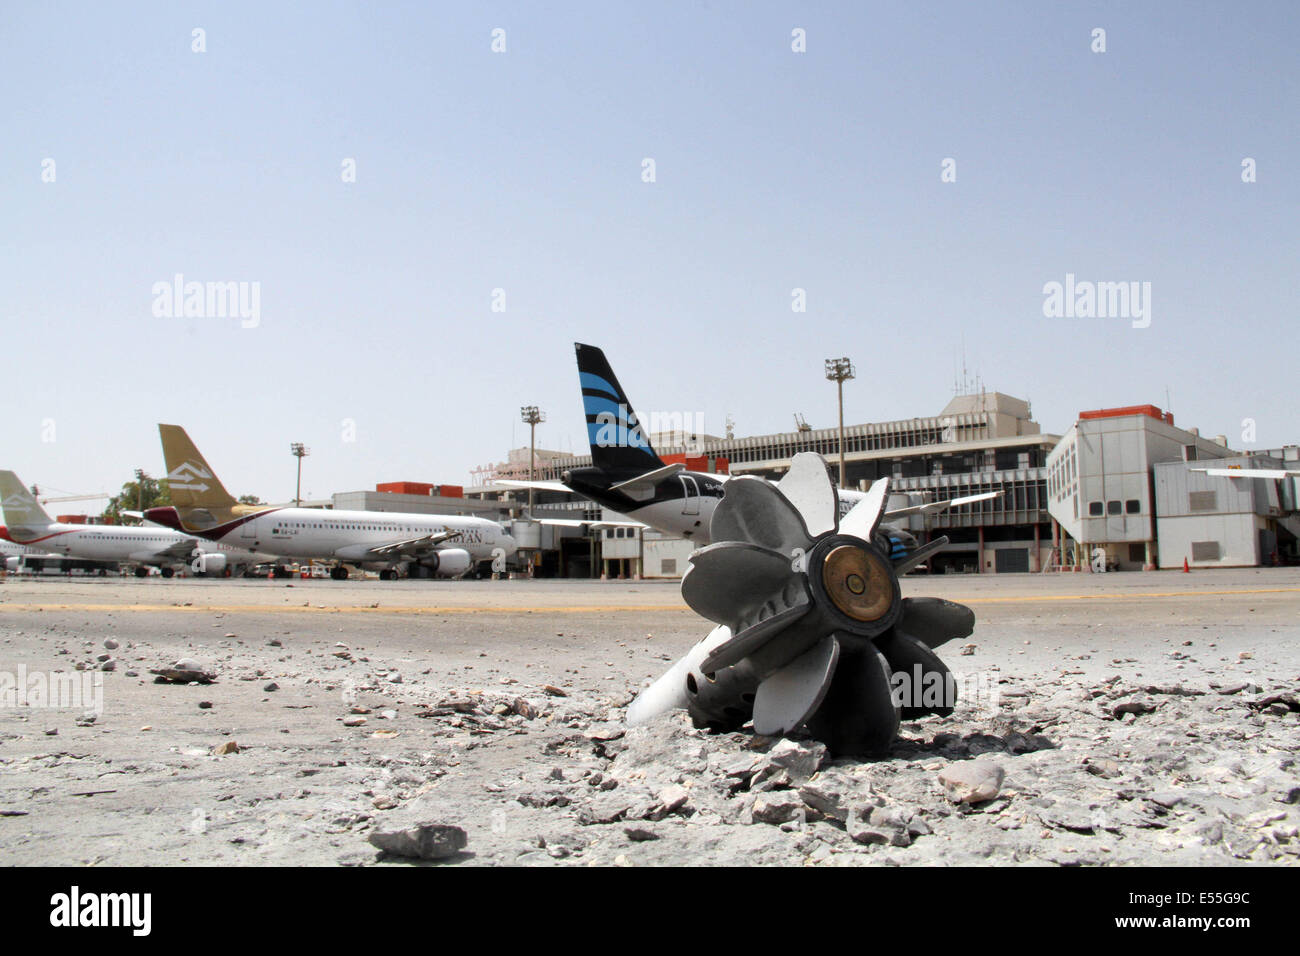 Tripoli, Libya. 21st July, 2014. The picture taken on July 21, 2014 shows a rocket propelled grenade hit into the tarmac of Tripoli International Airport, Libya. The airport has been under constant attack by Islamist fighters since July 13 with the death toll reaching 47. Credit:  Hamza Turkia/Xinhua/Alamy Live News Stock Photo